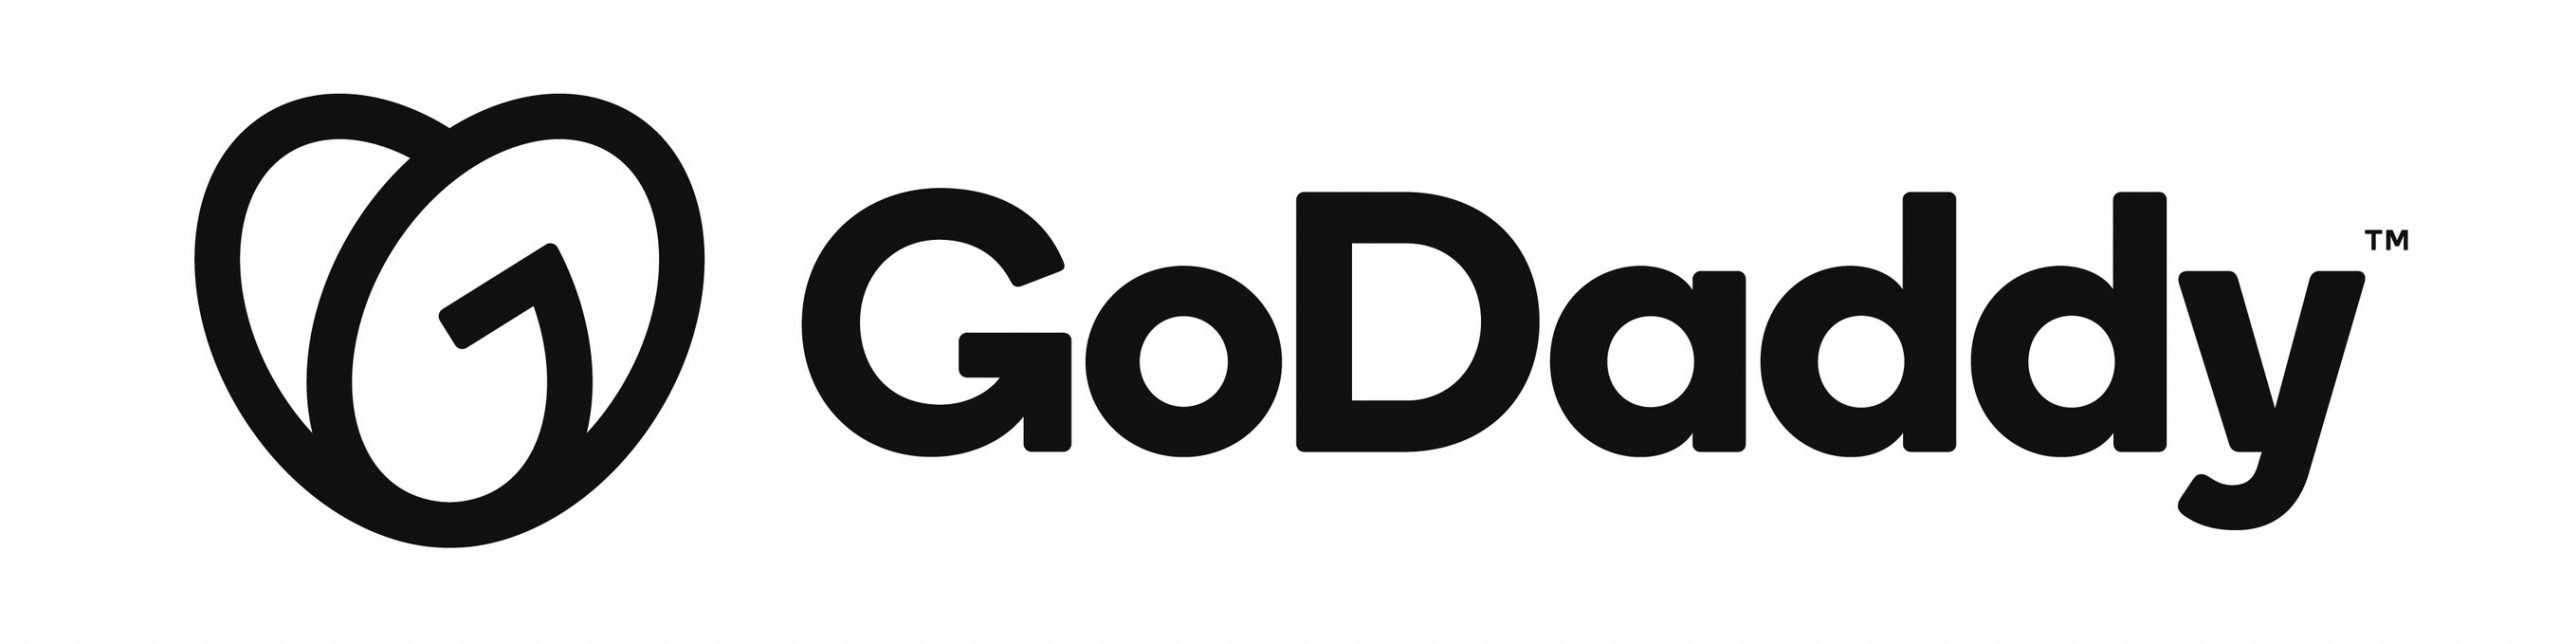 GoDaddy Coupons in March 2020: 99 cents .COM domain coupon ...